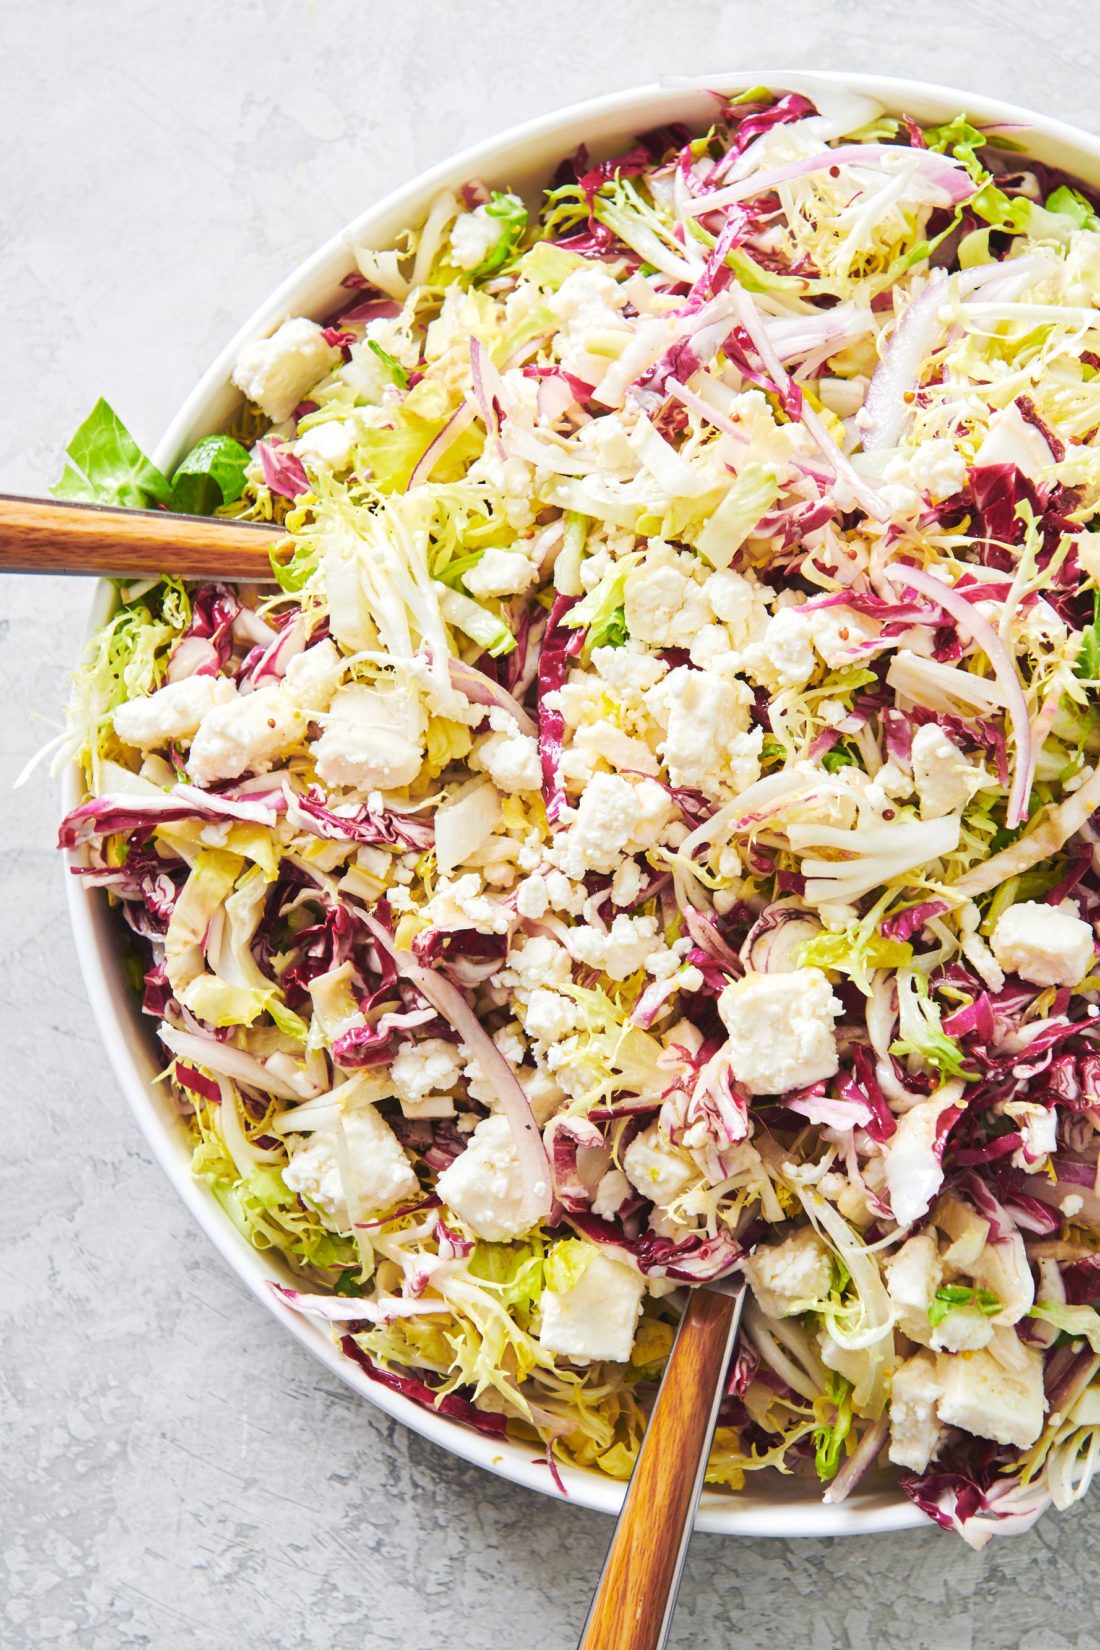 Utensils in a bowl of Frisee, Radicchio and Escarole Salad with Citrus Dressing.